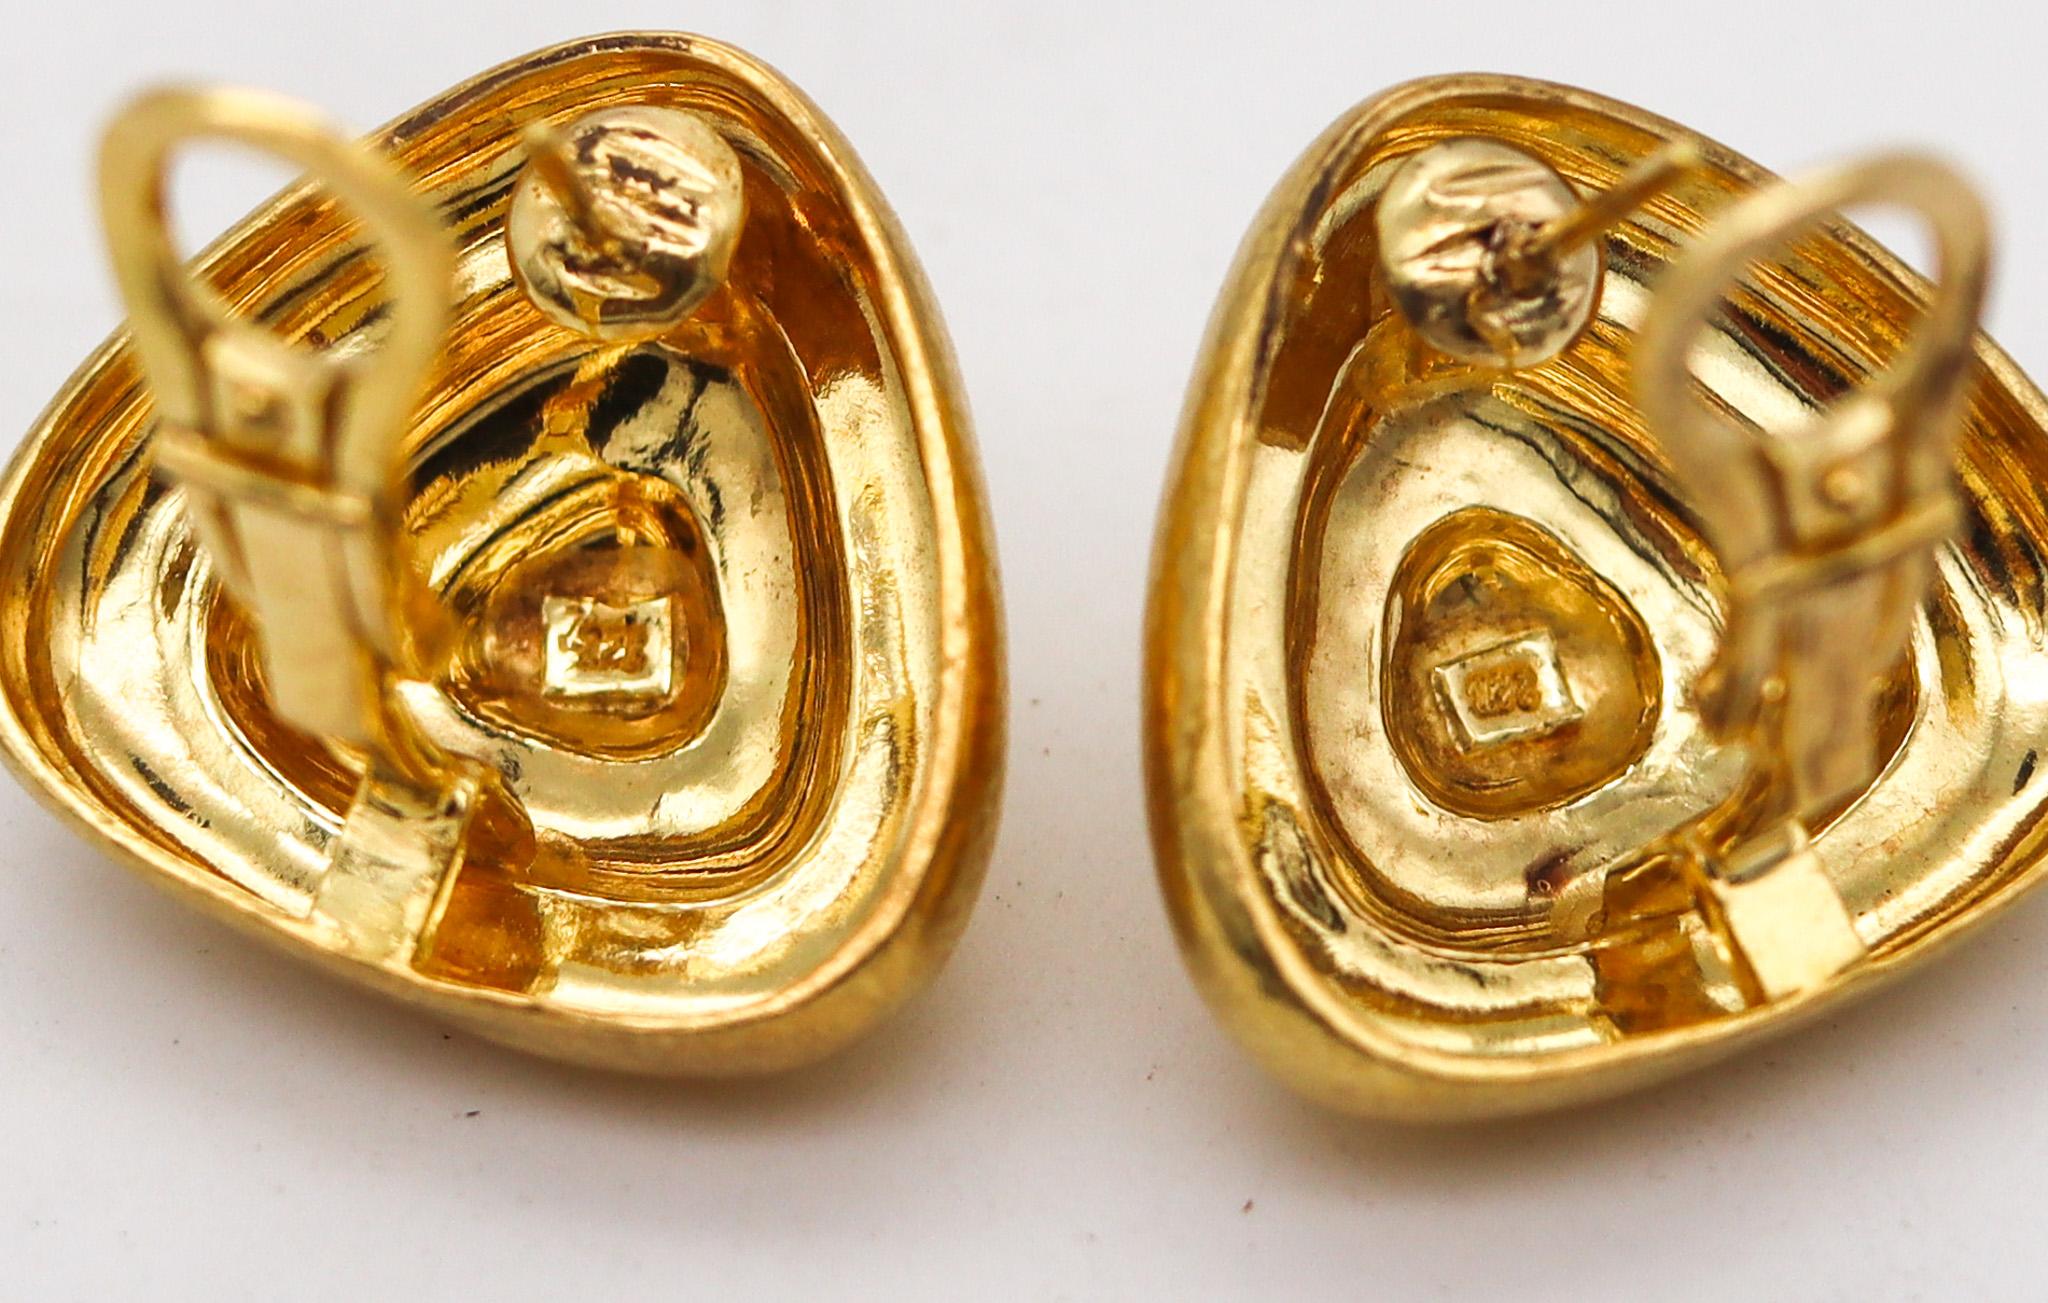 Greek Revival Zolotas Greece Pyramidal Triangular Clips on Earrings in Solid 22 Kt Yellow Gold